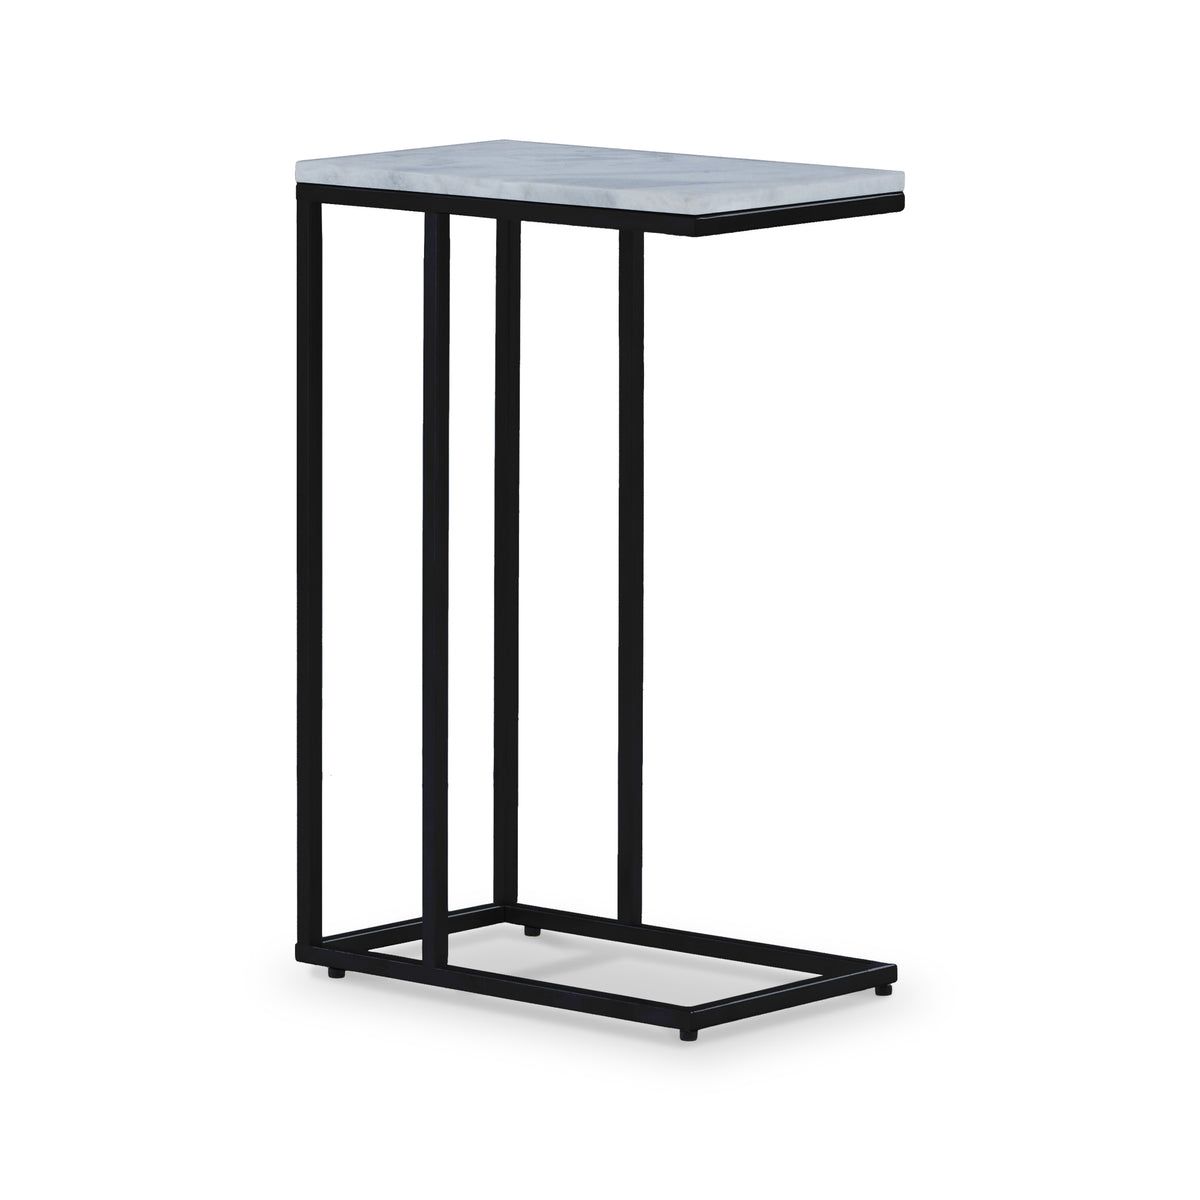 Elissa White Marble Side Table with Black Leg from Roseland Furniture